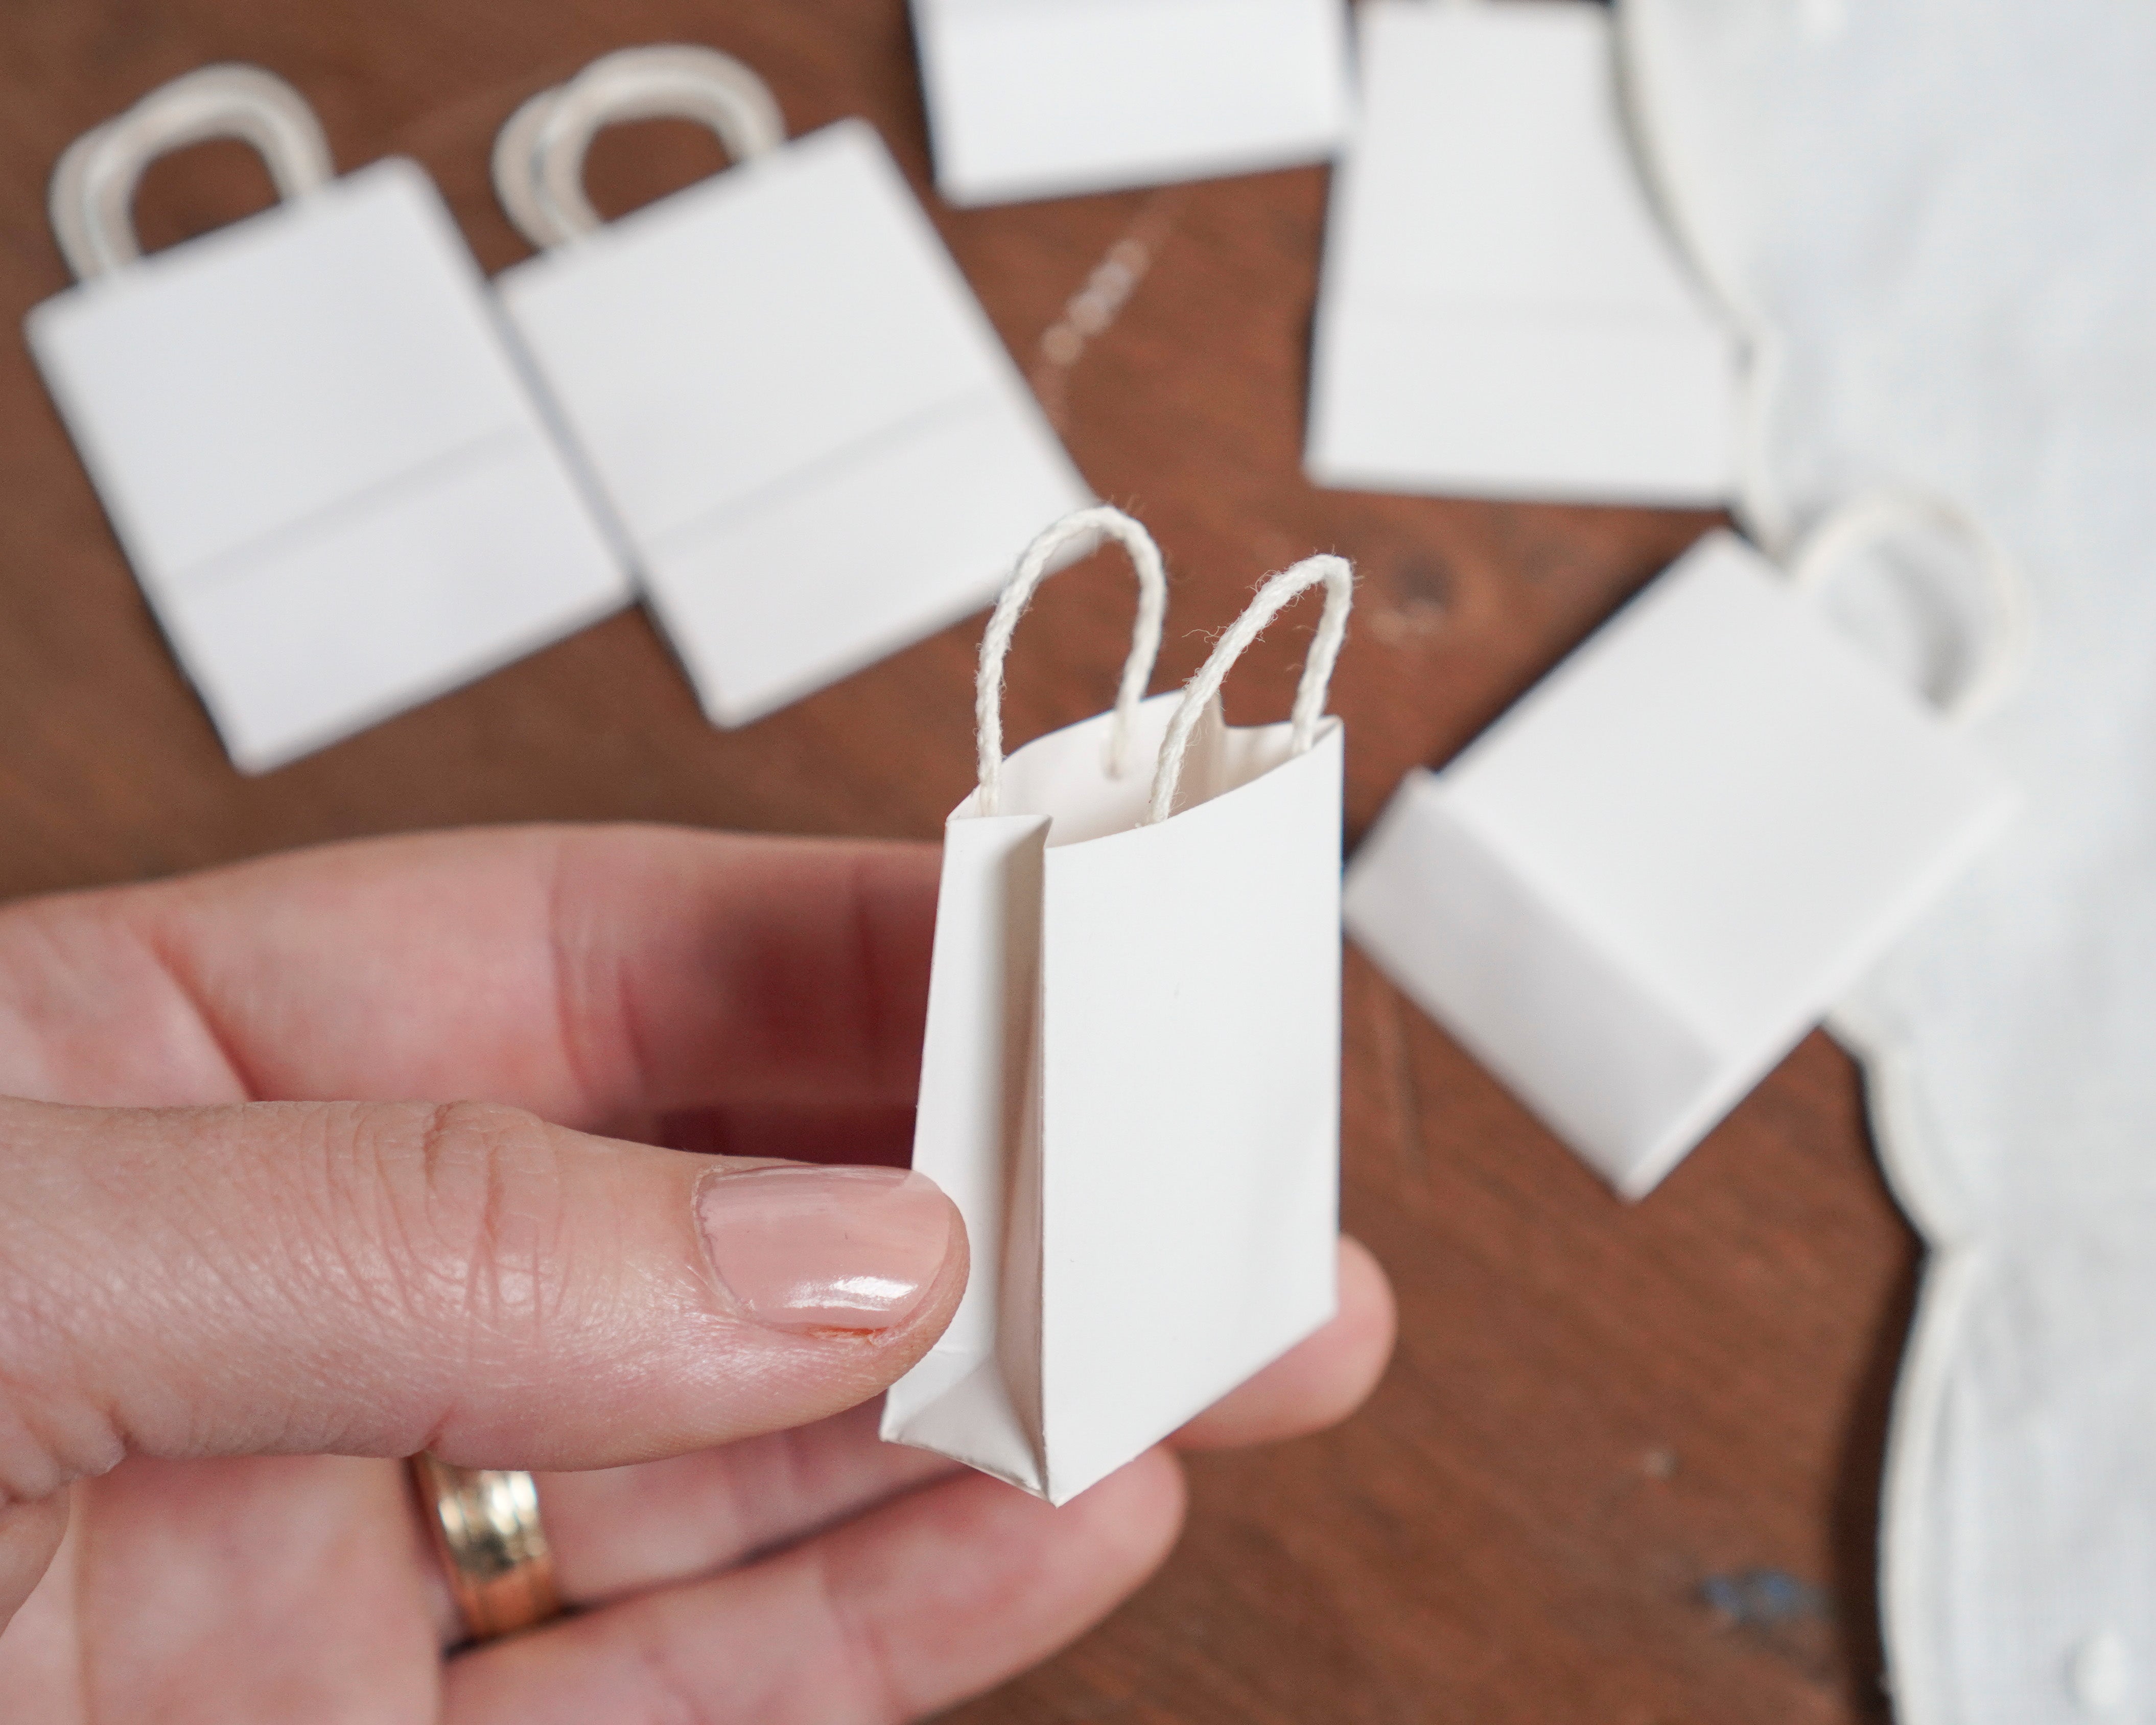 Miniature Shopping Bags - Tiny Dollhouse 1:12 Scale White Paper Gift Bags, 6 Pcs.